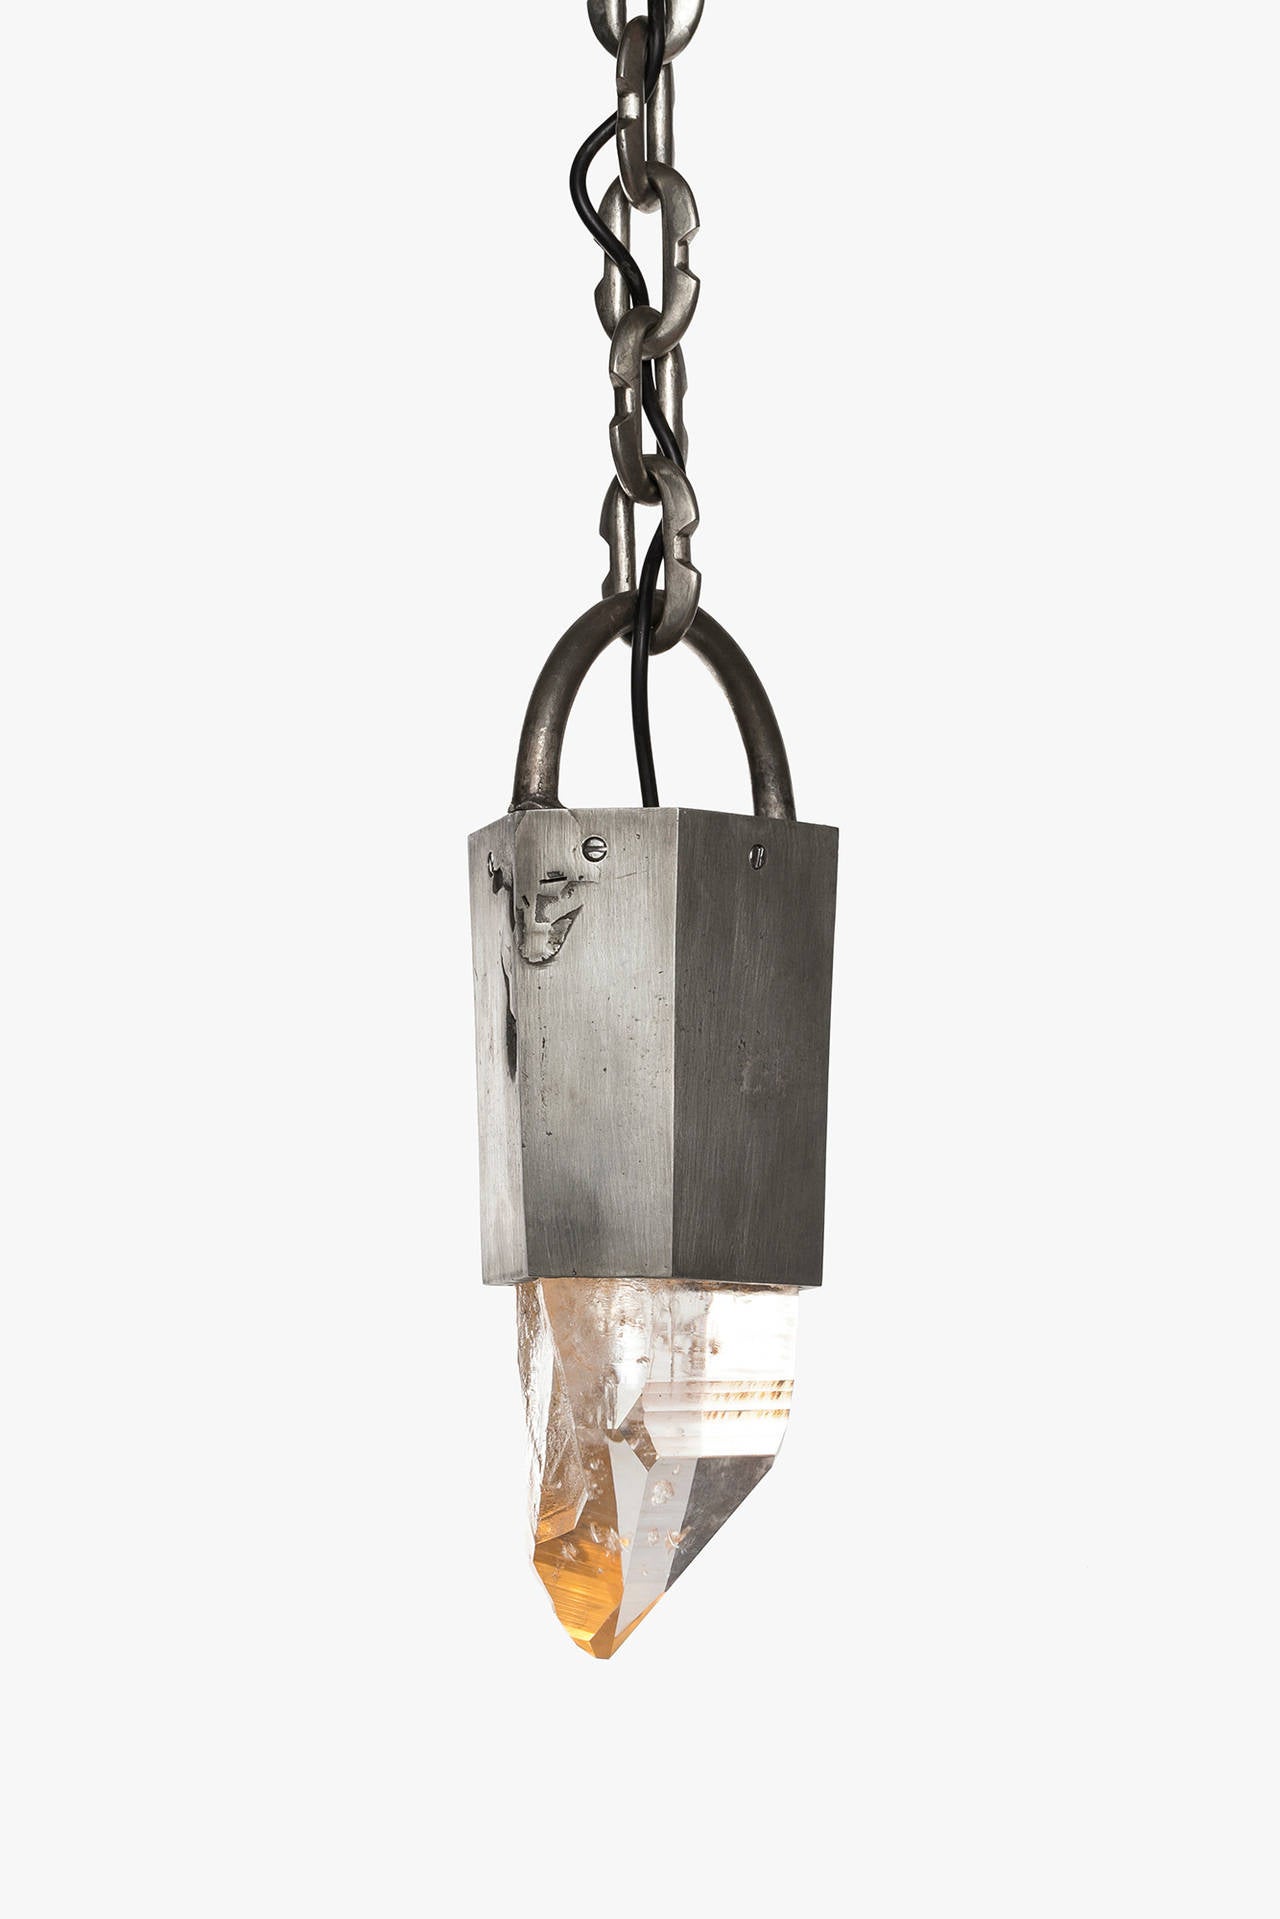 Pendant II by P4H (Parts of Four Home) features a 2.36 kg Lemurian quartz crystal illuminated by hidden LED's set into a hand-fabricated iron canopy with acid patina finish suspended by a white bronze chain. 

P4H (Parts of Four Home) is a